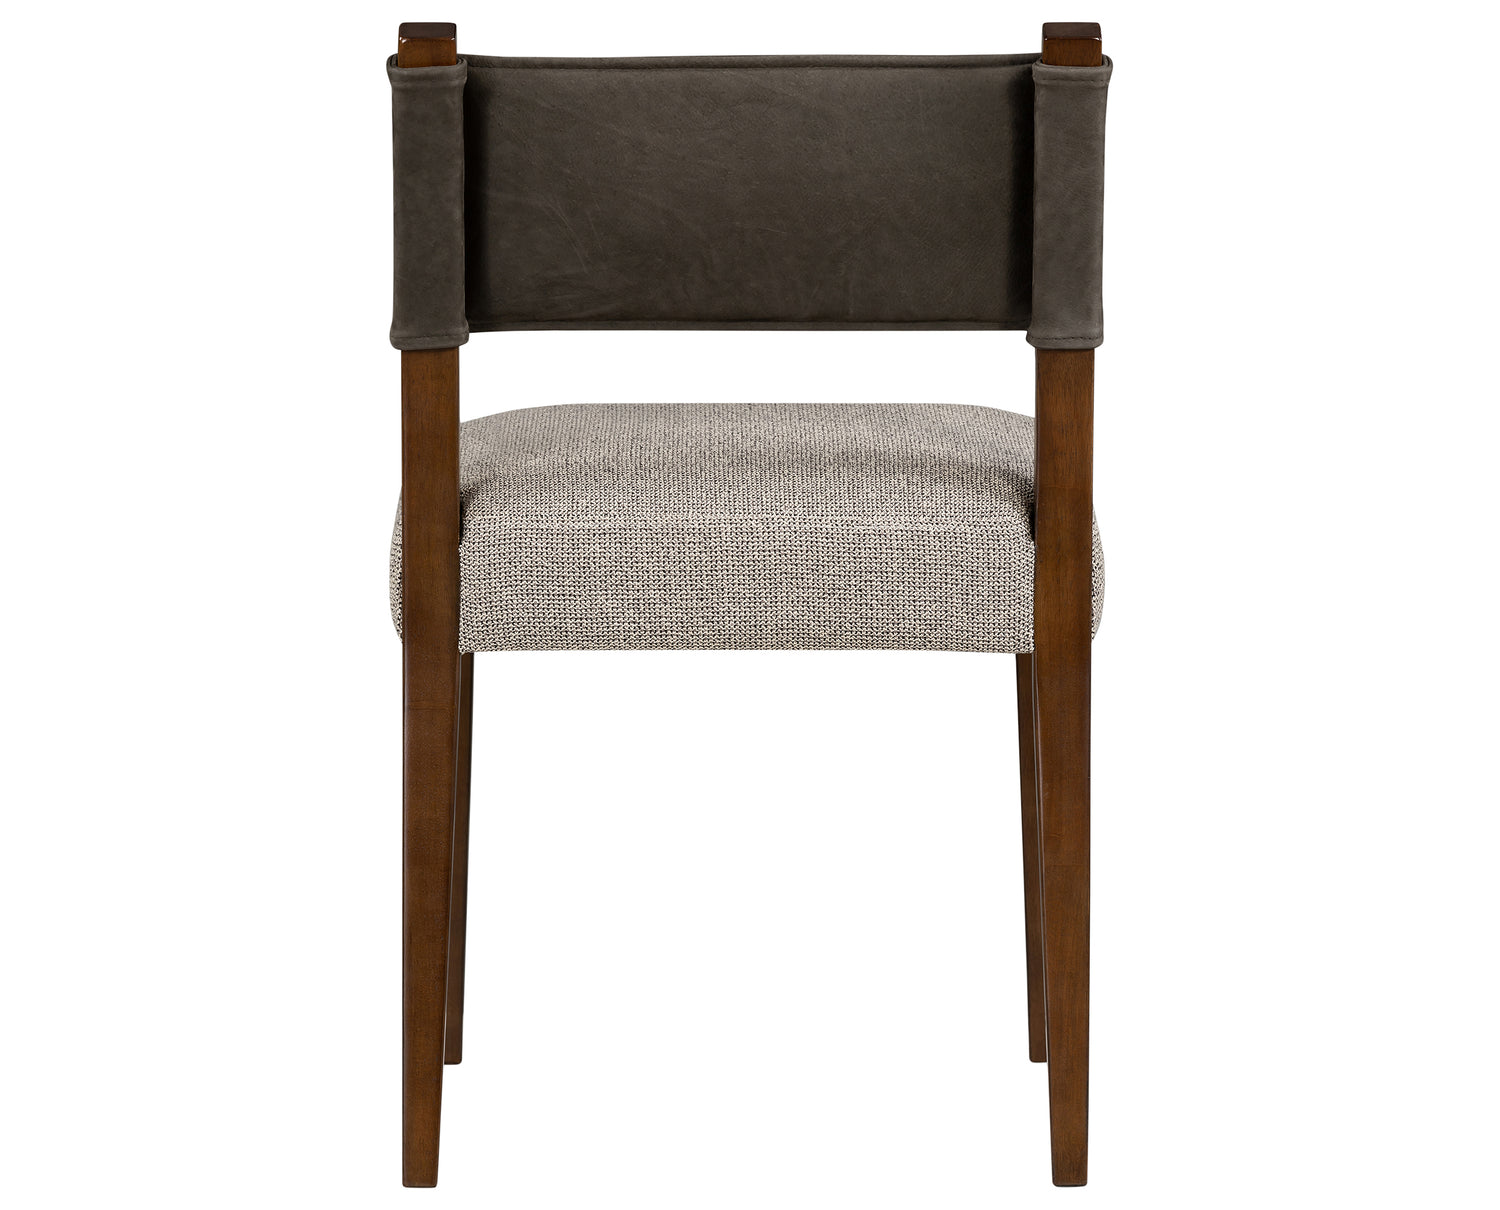 Tulsa Ink Fabric & Nubuck Charcoal Leather with Antique Sable Parawood | Ferris Dining Chair | Valley Ridge Furniture